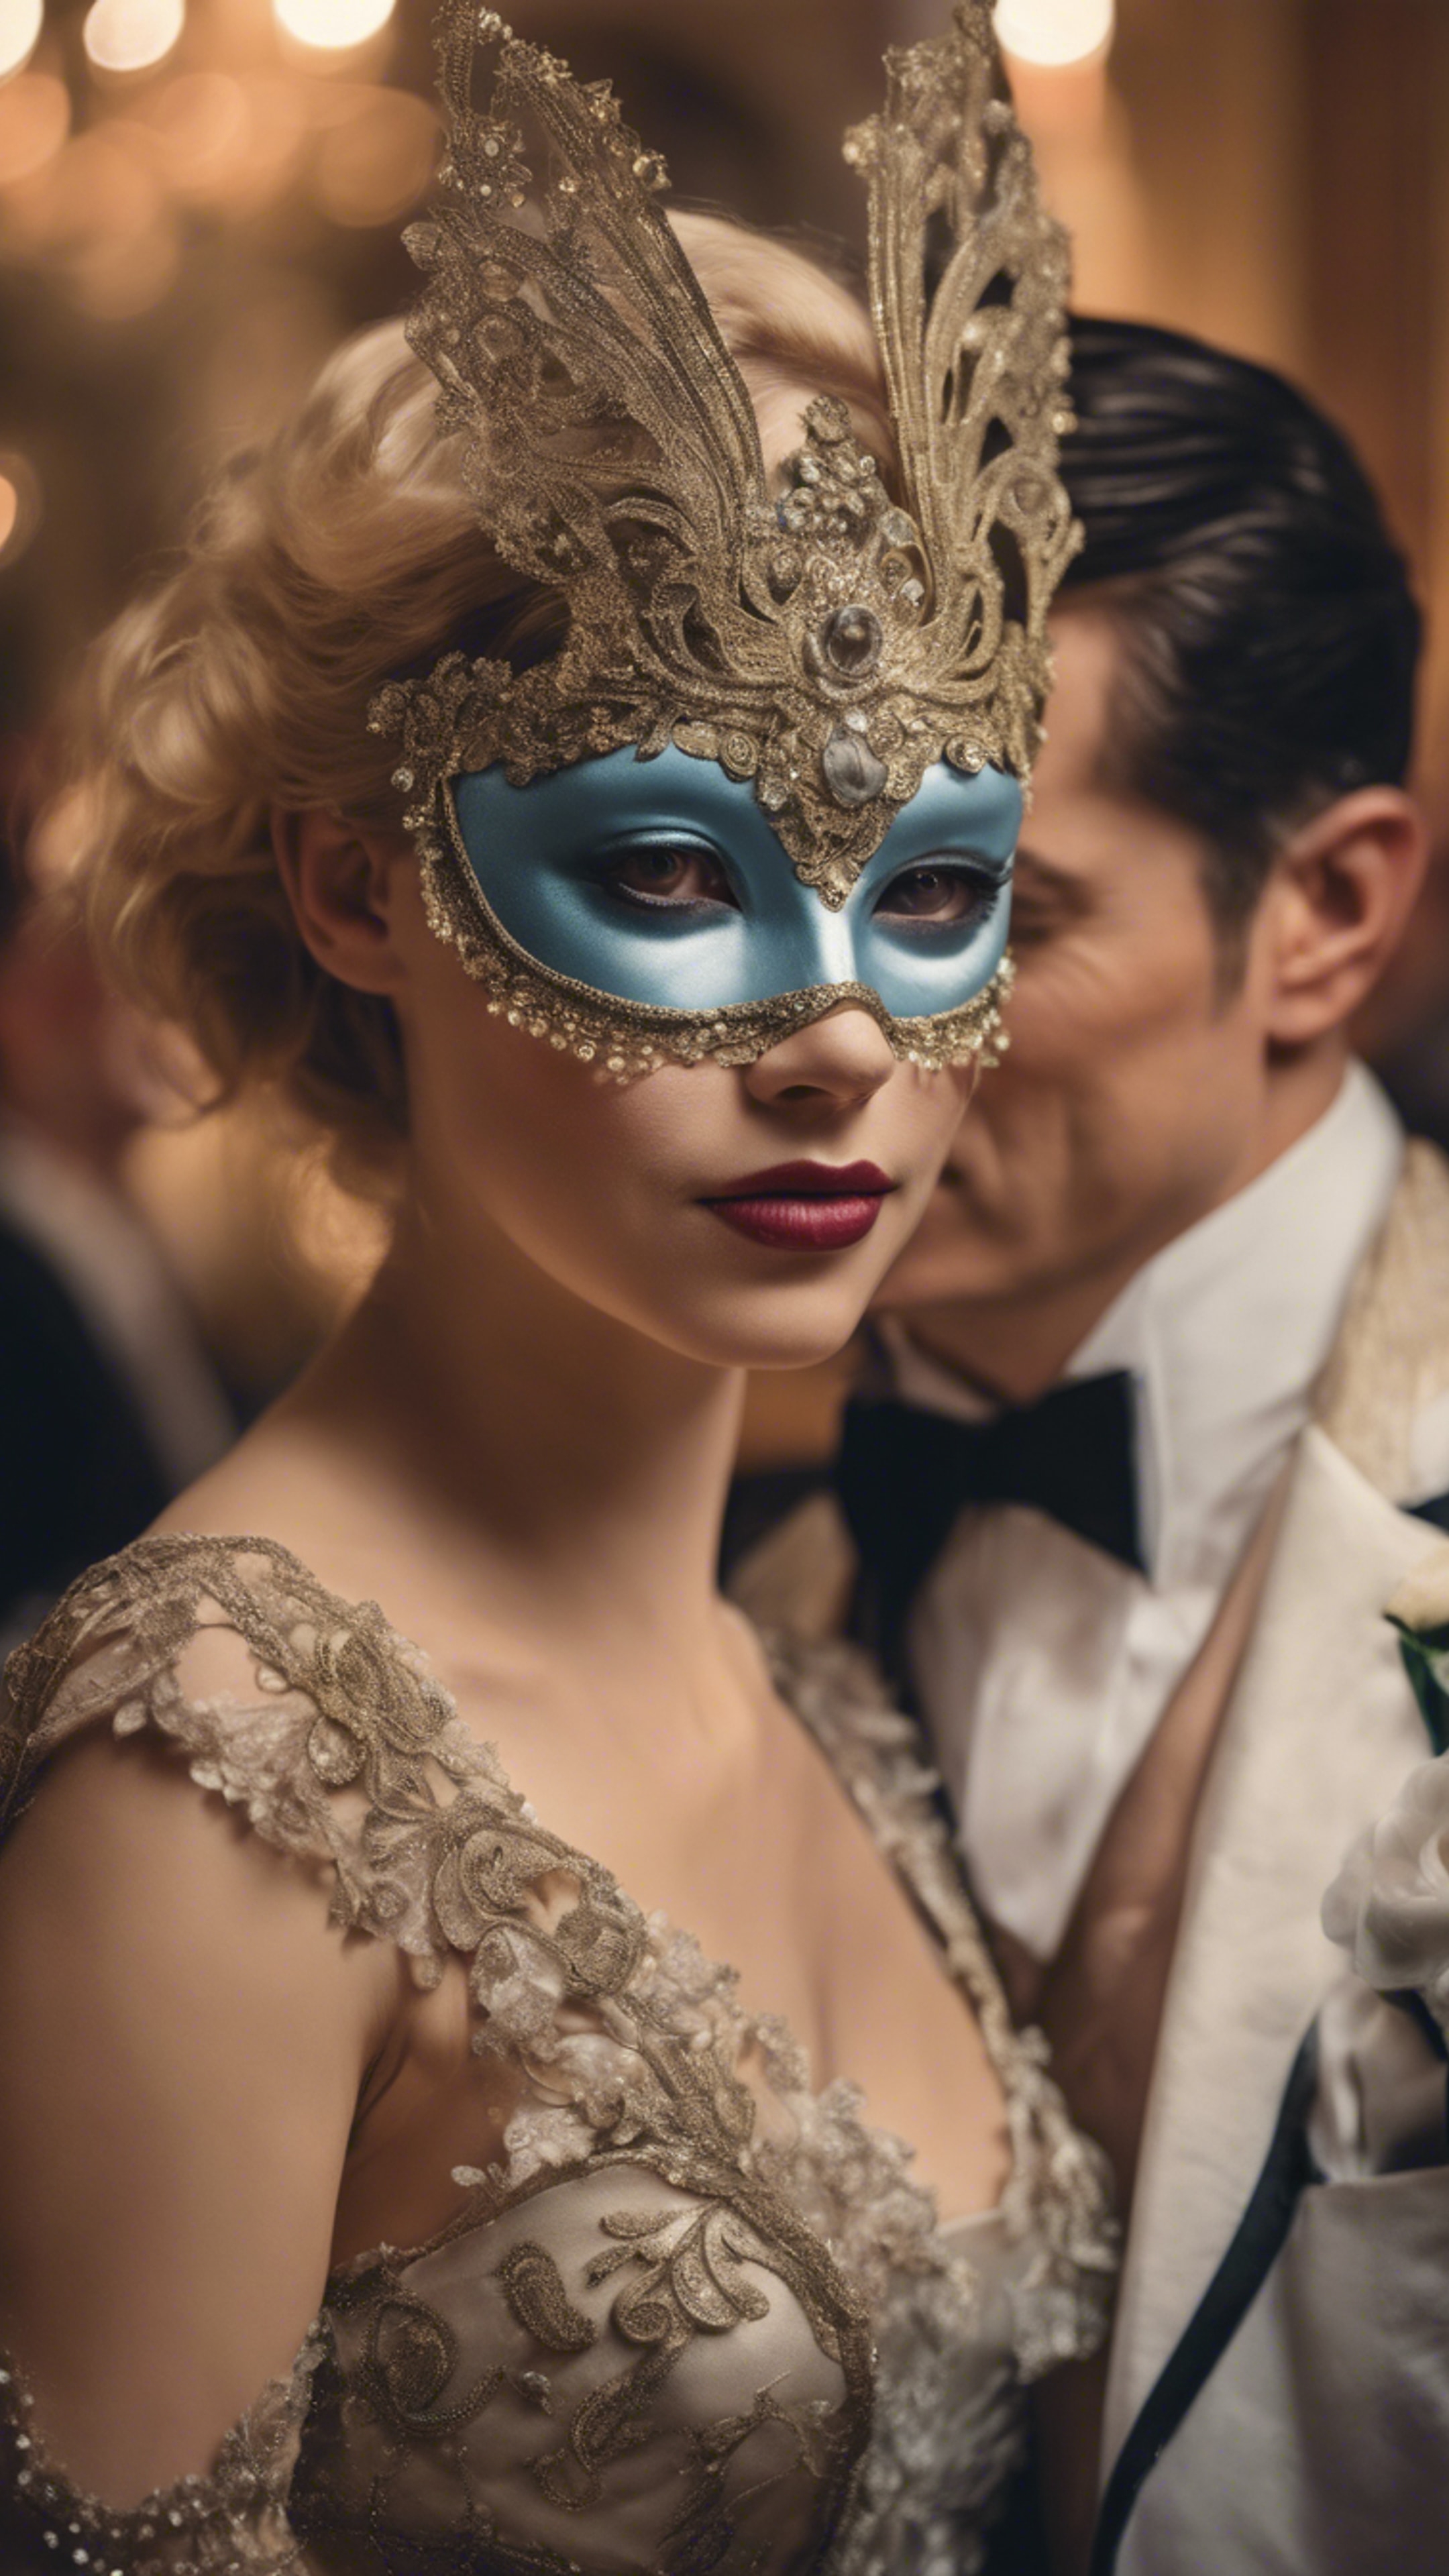 An elegant masquerade ball in an opulent ballroom, guests dressed in vintage costumes and masks. Wallpaper[7cc81f2afb3c4a8c8244]